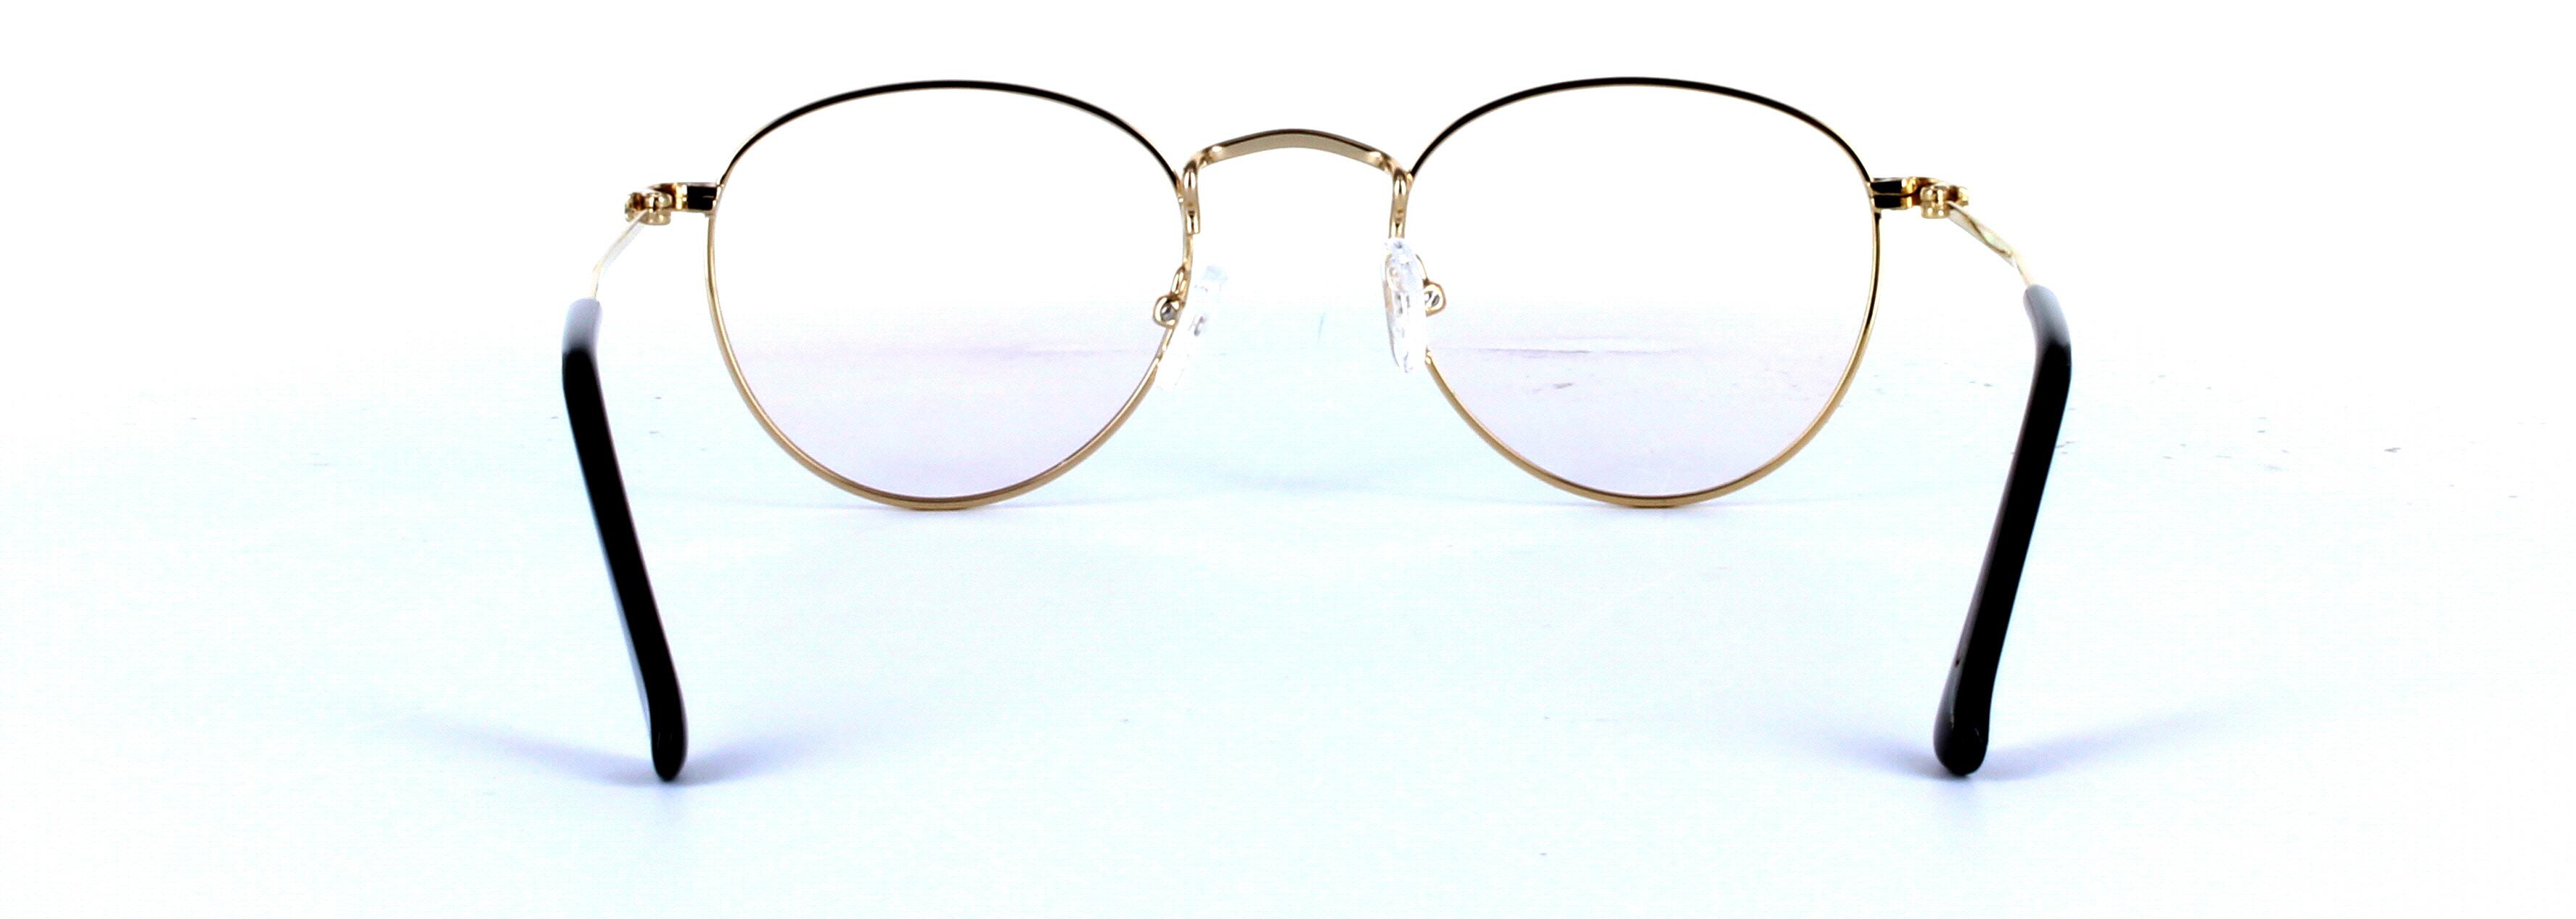 Birdy Gold Full Rim Round Metal Glasses - Image View 3